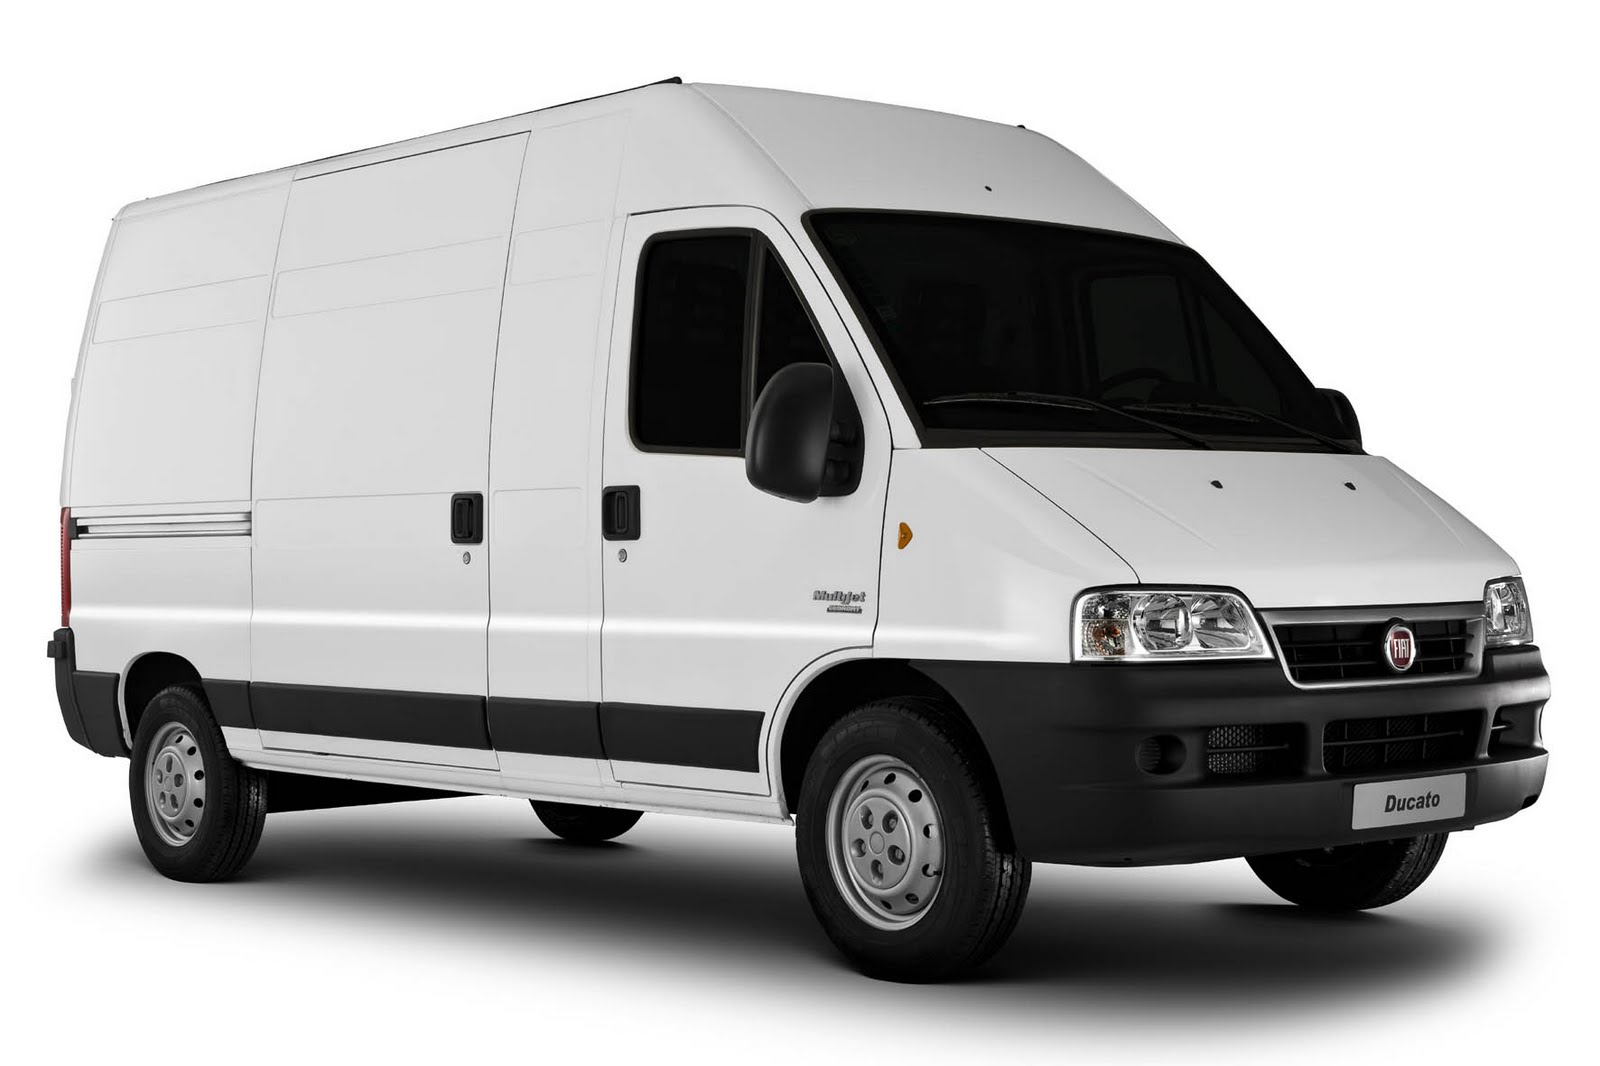 Fiat Ducato 1999: Review, Amazing Pictures and Images â Look at the car